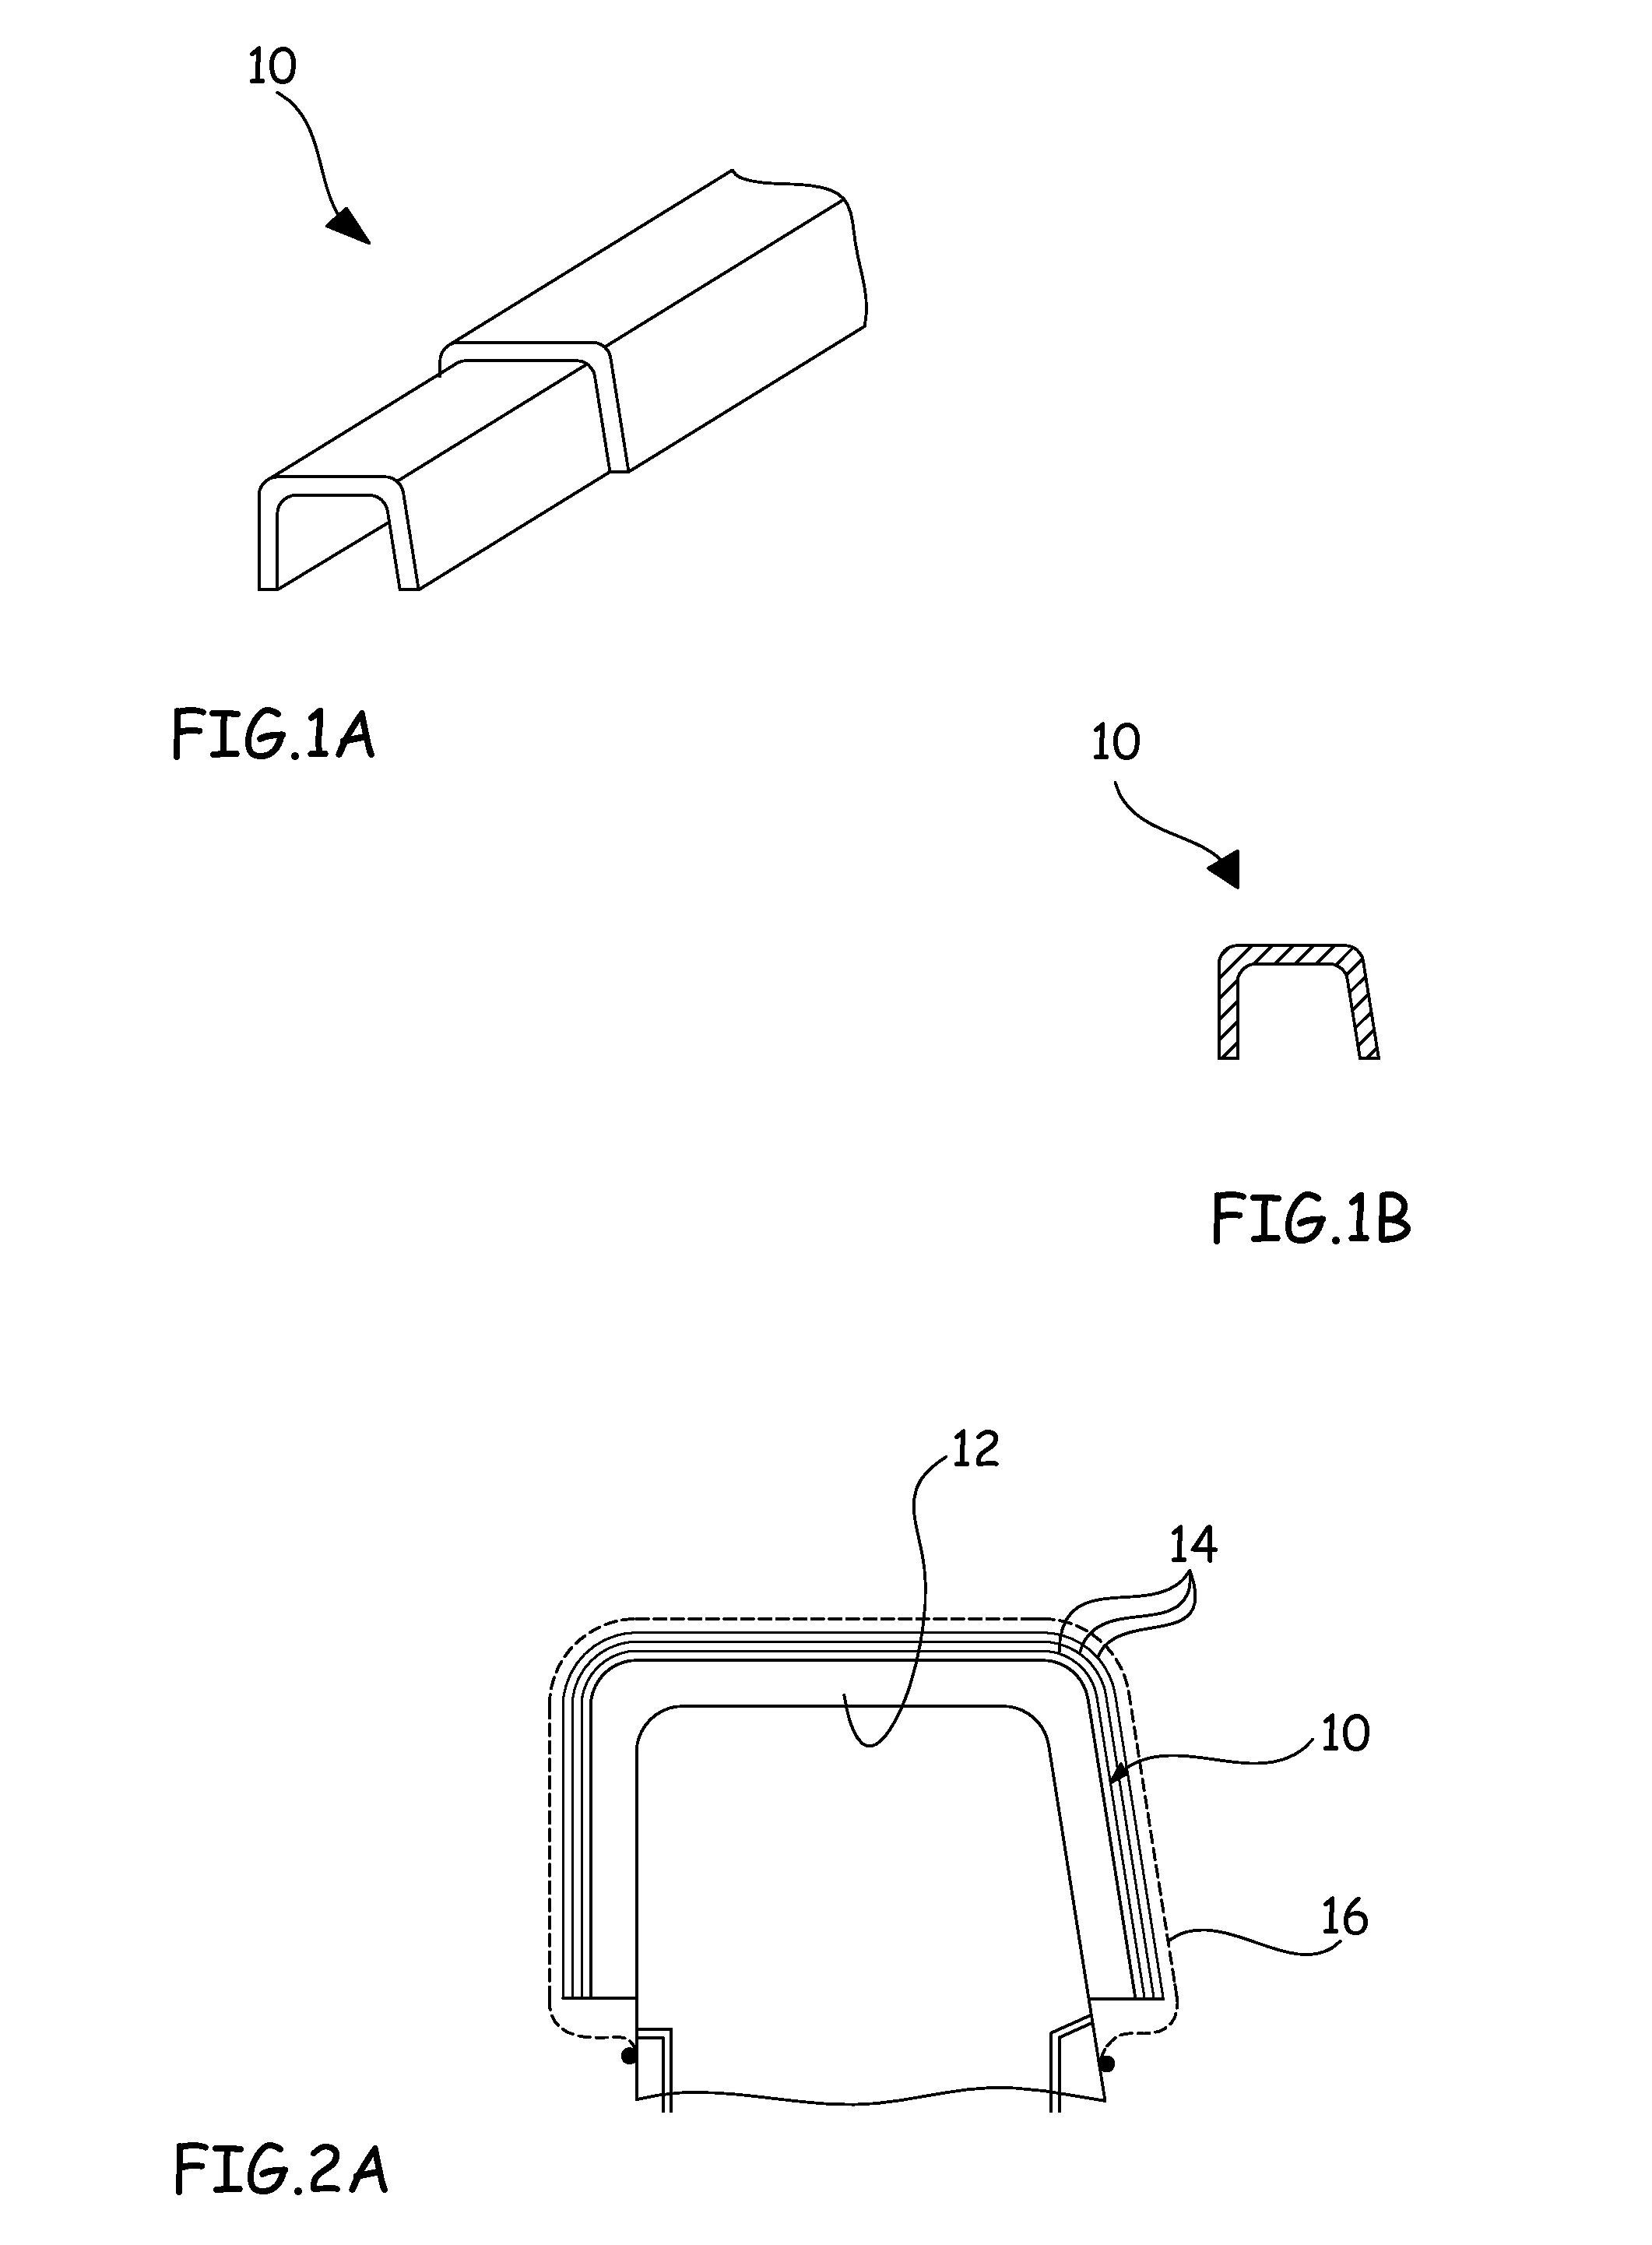 Process for manufacturing a part made of composite material that comprises at least one radius of curvature